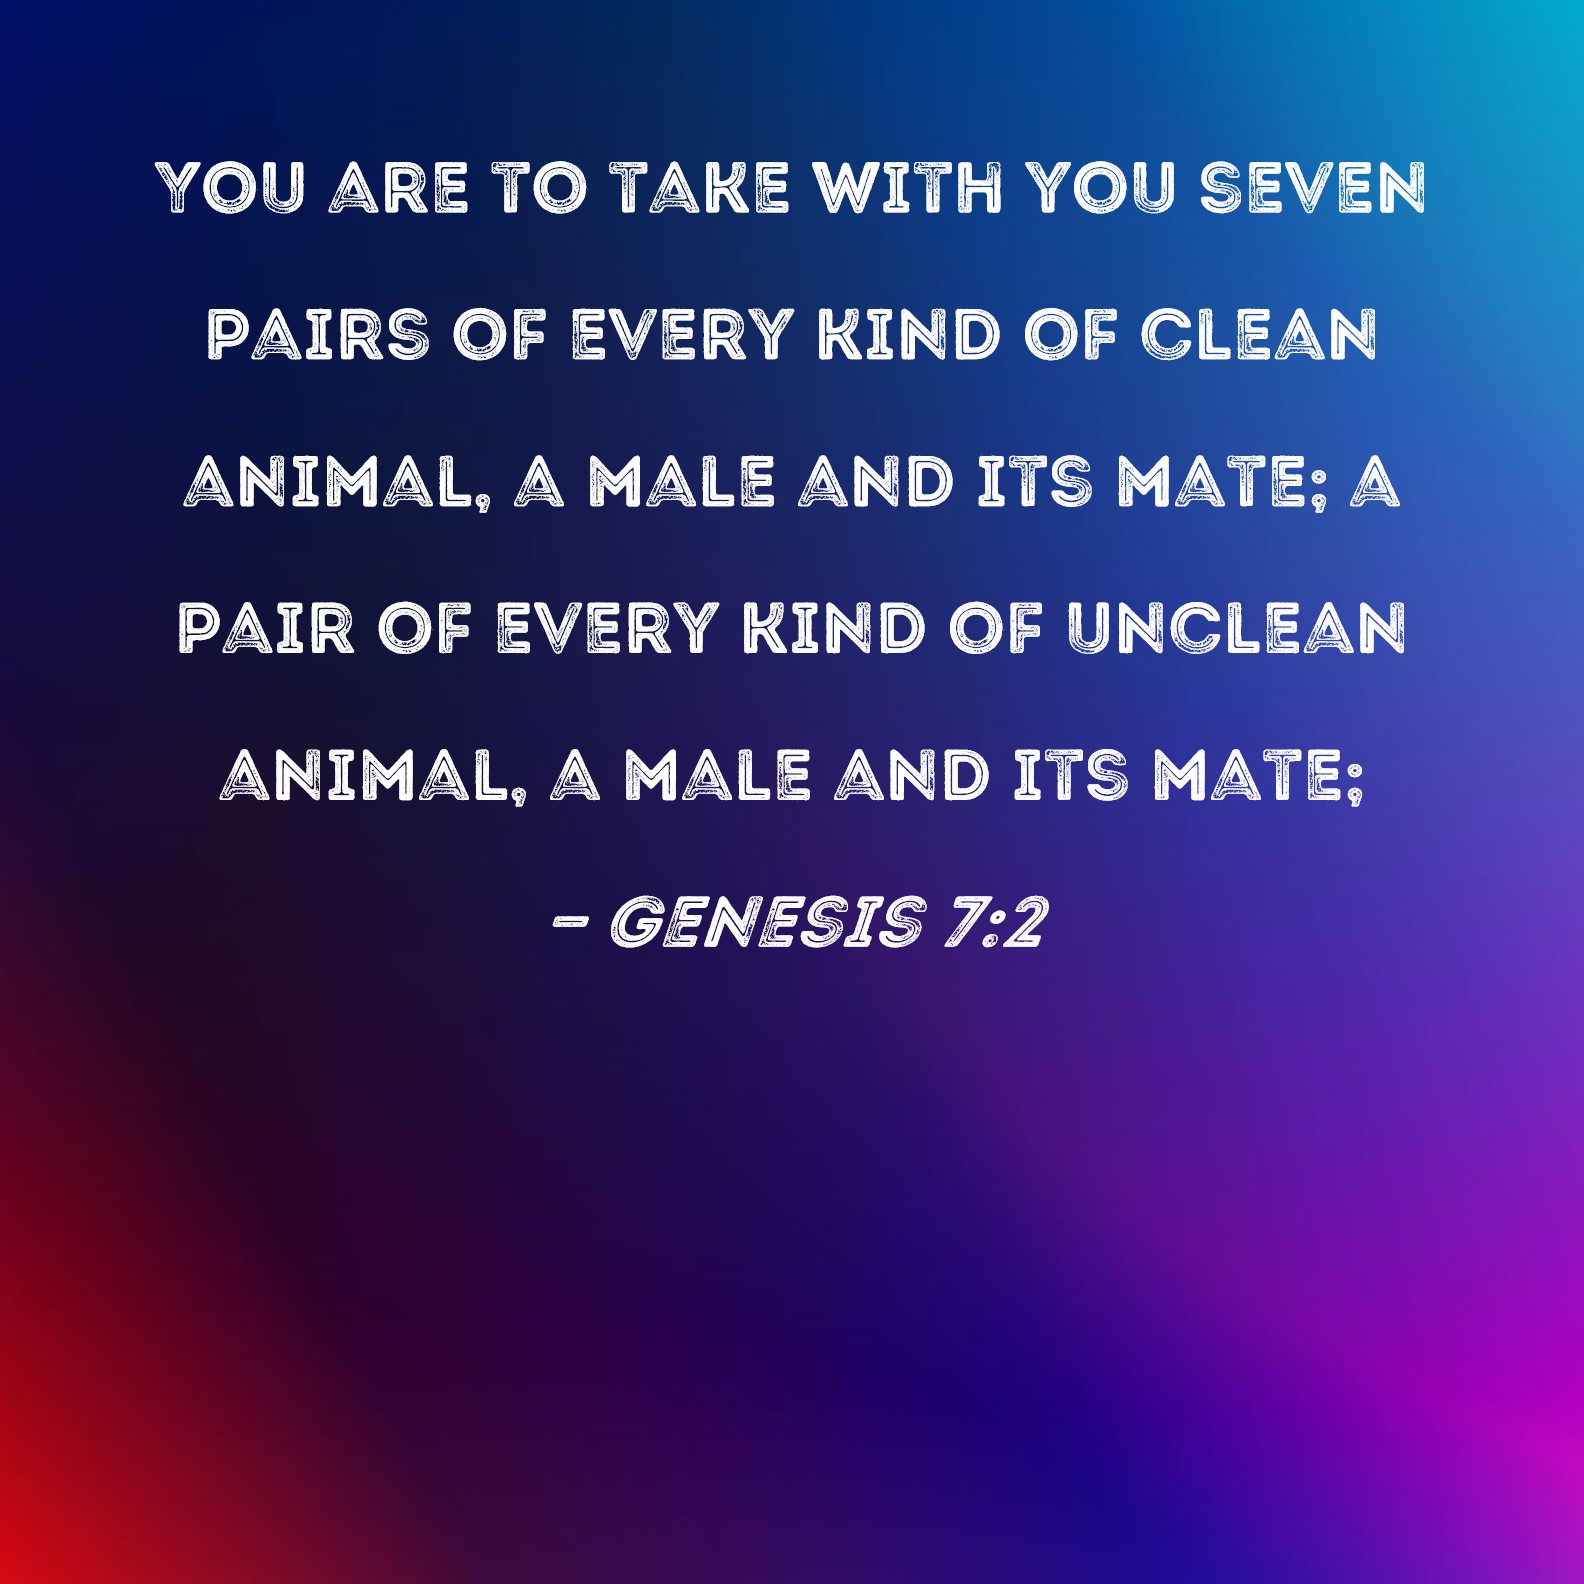 Genesis 7:2 You are to take with you seven pairs of every kind of clean  animal, a male and its mate; a pair of every kind of unclean animal, a male  and